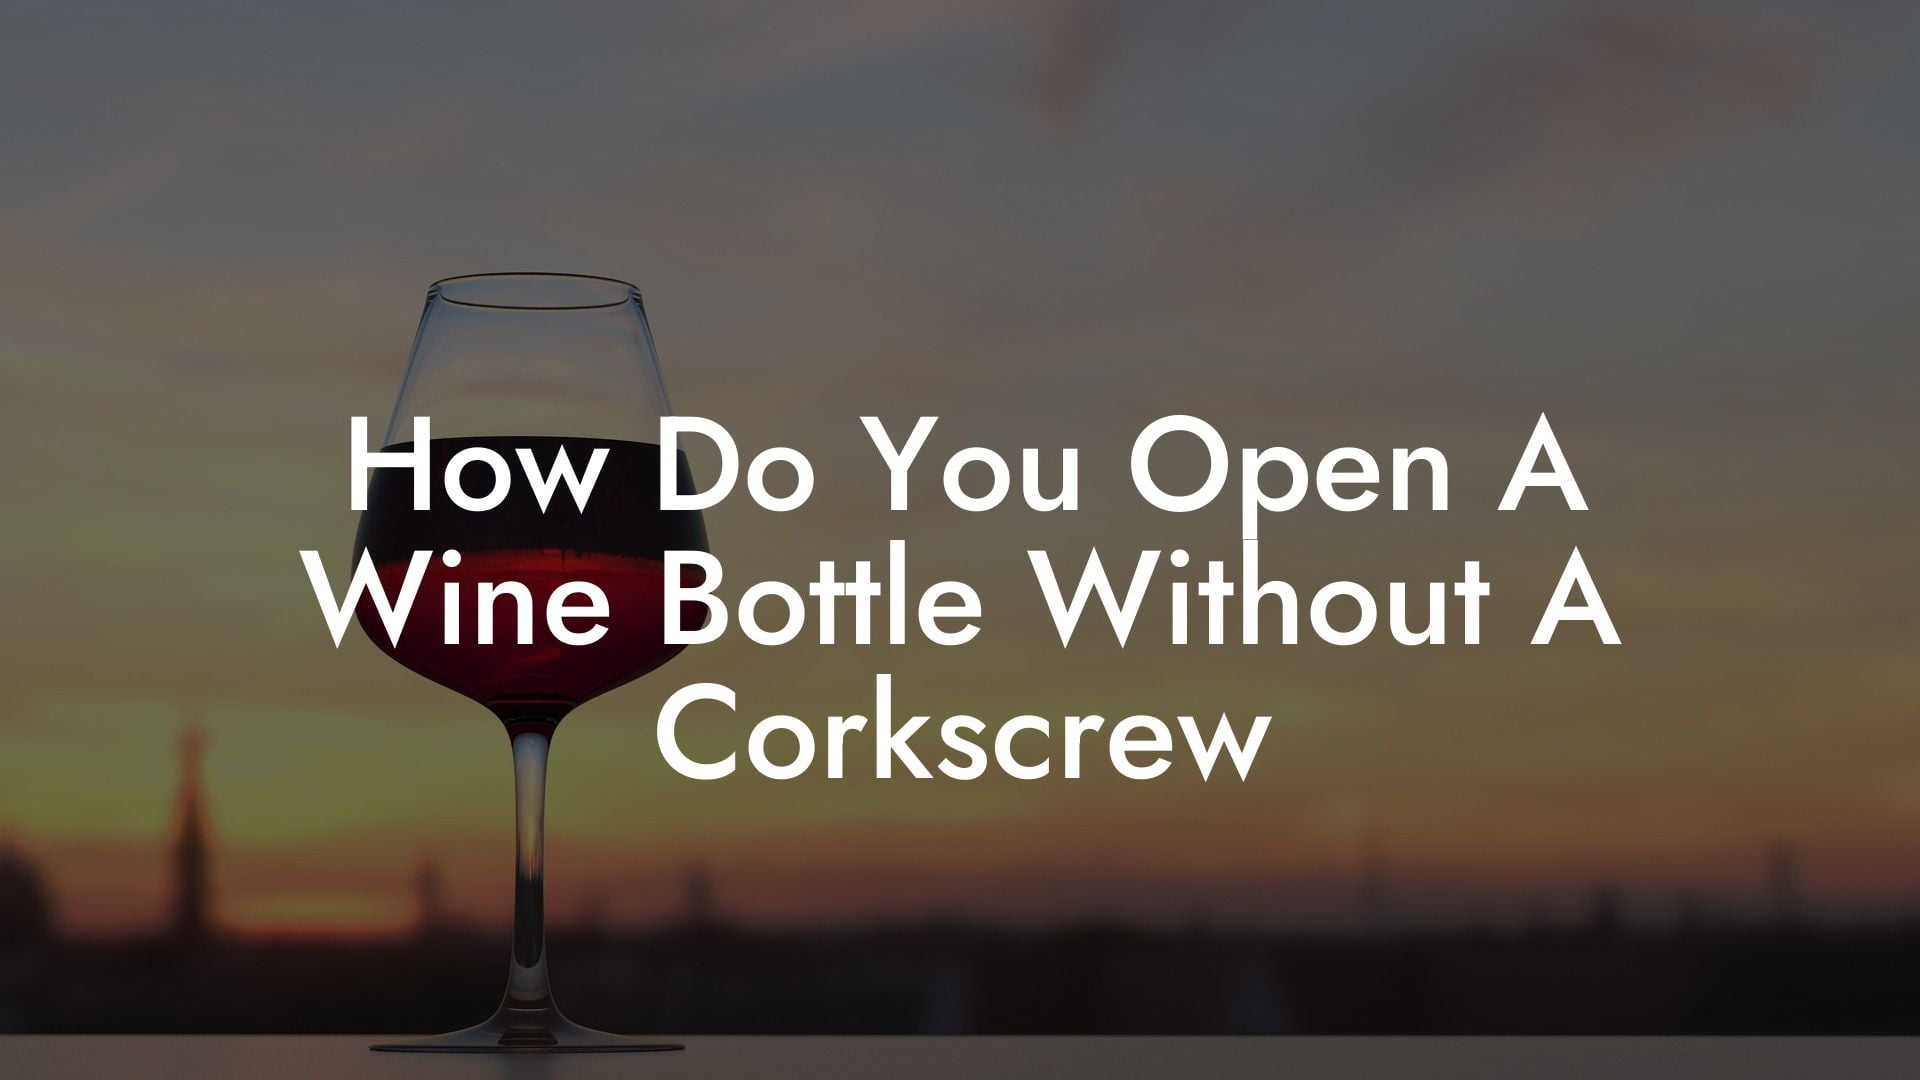 How Do You Open A Wine Bottle Without A Corkscrew